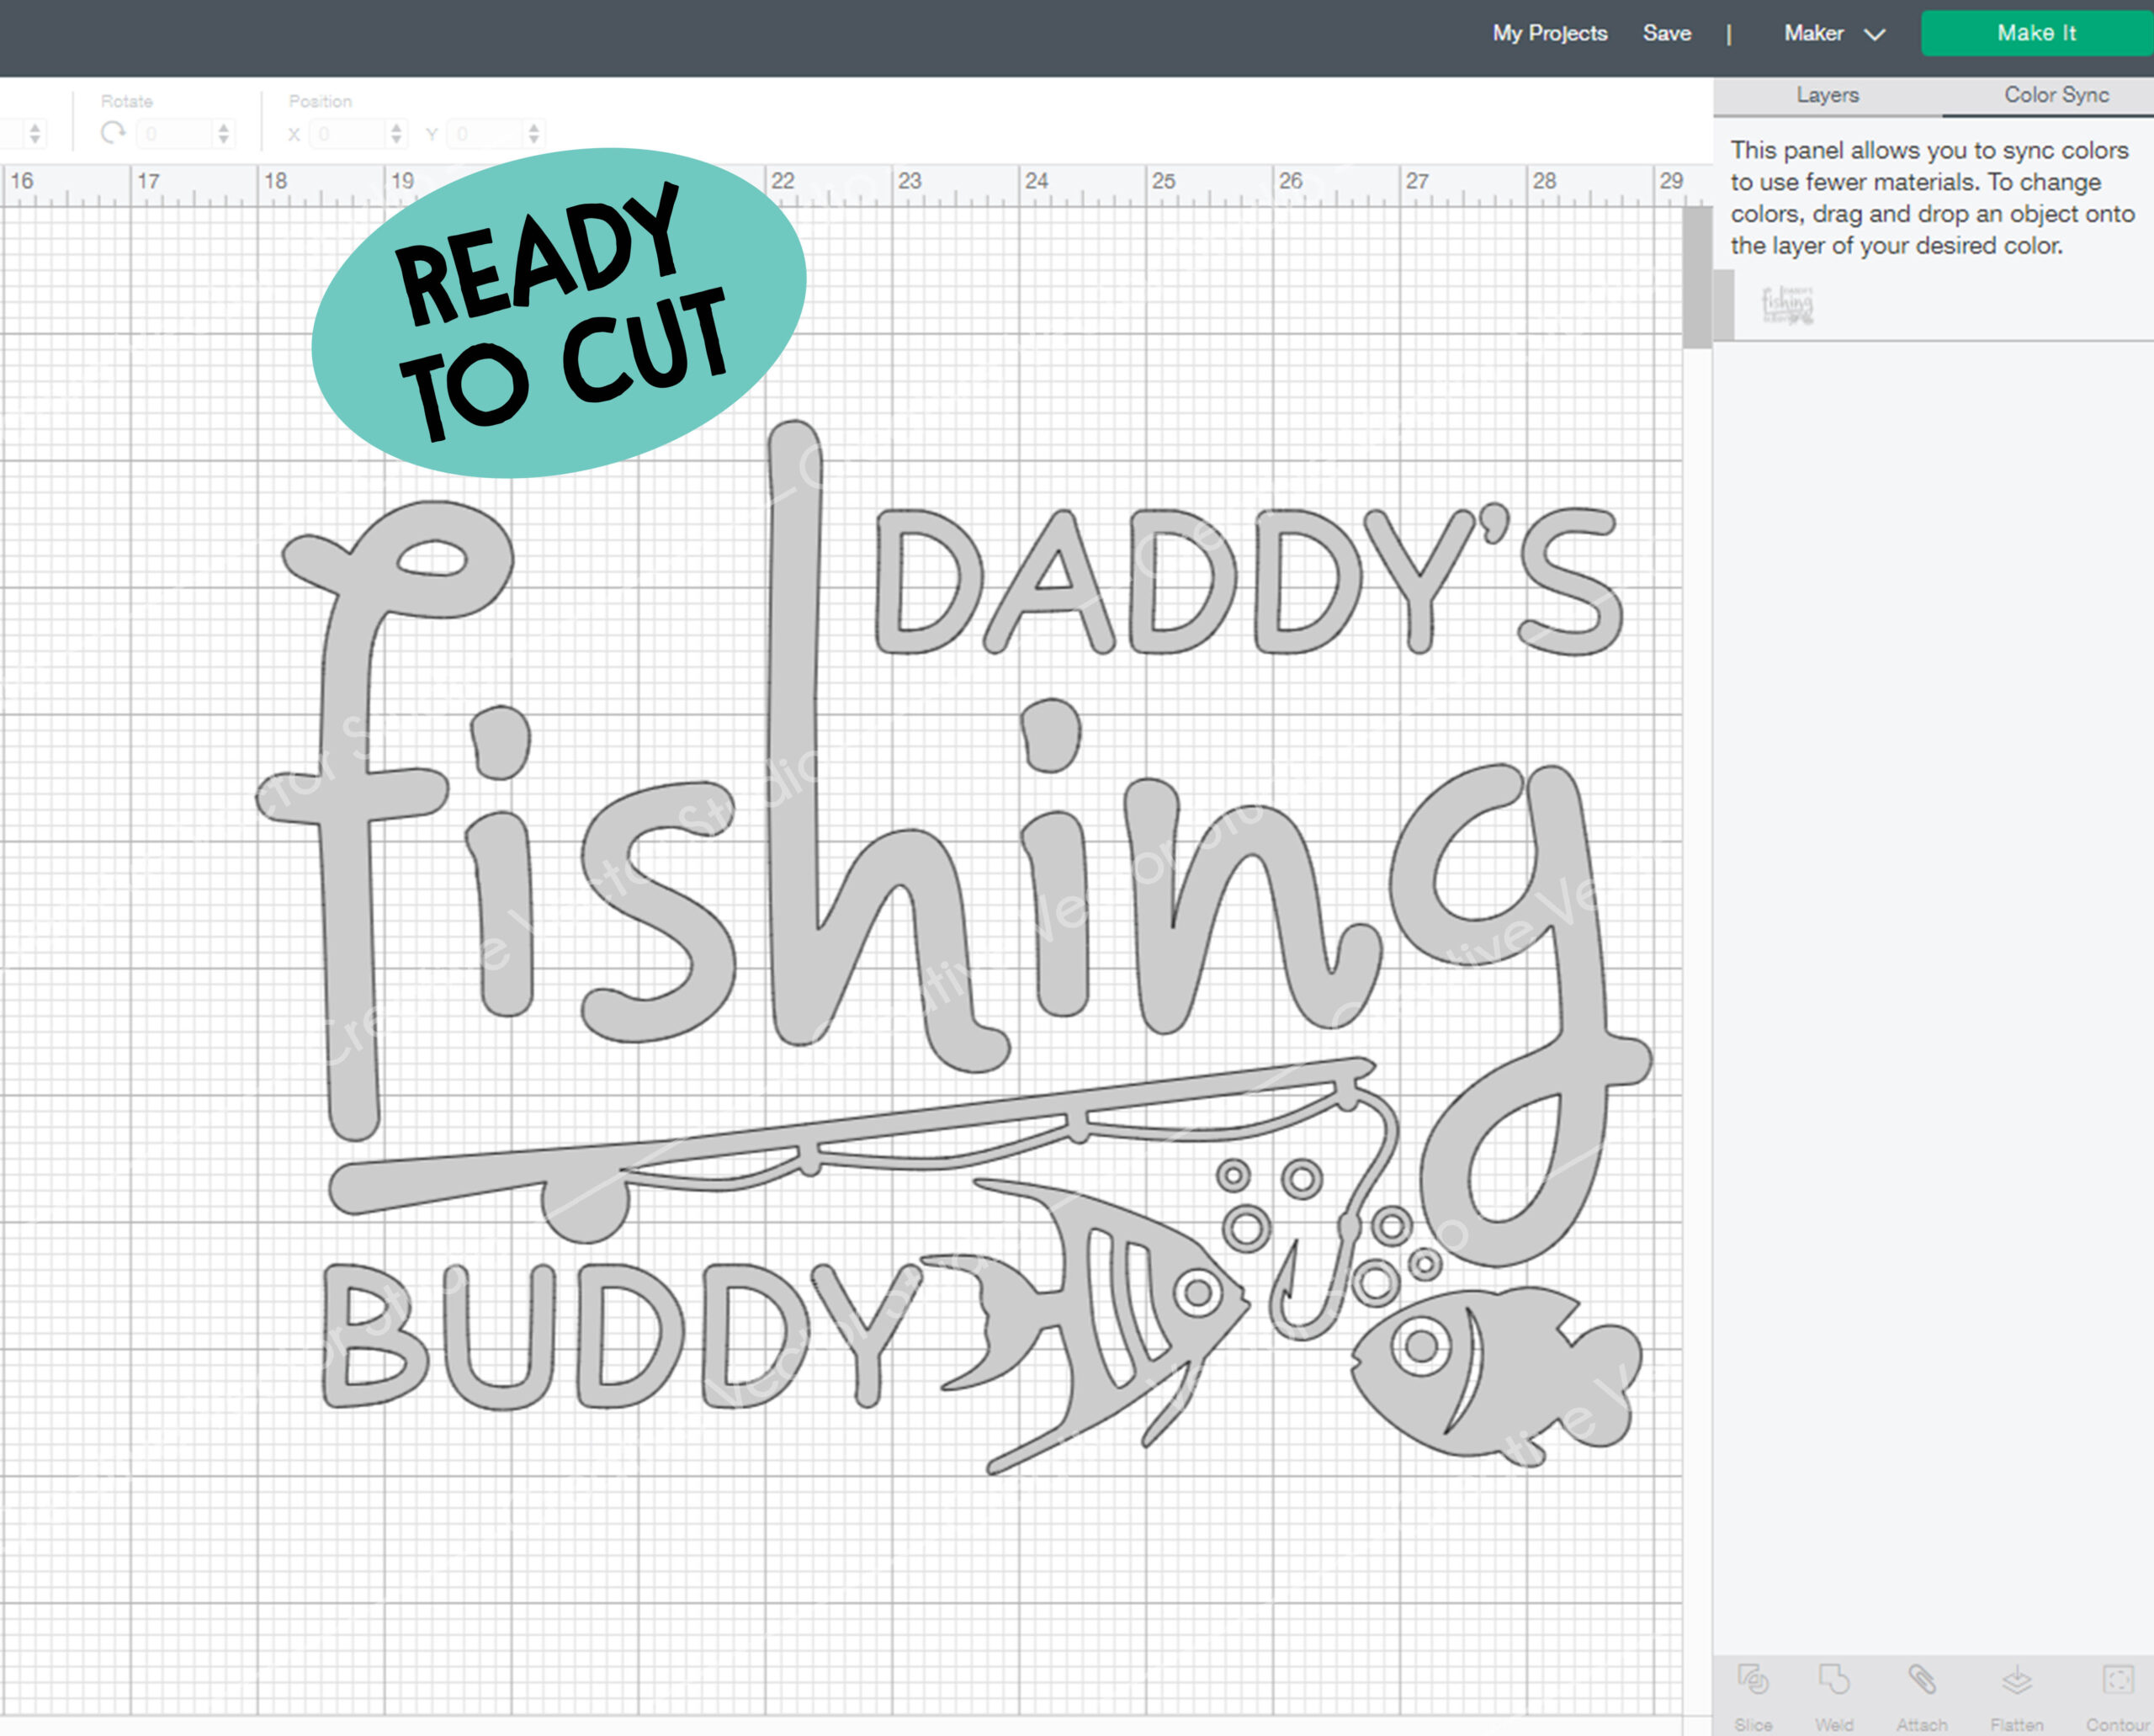 FREE SVG! ~Daddys fishing buddy. Join FB group for access!